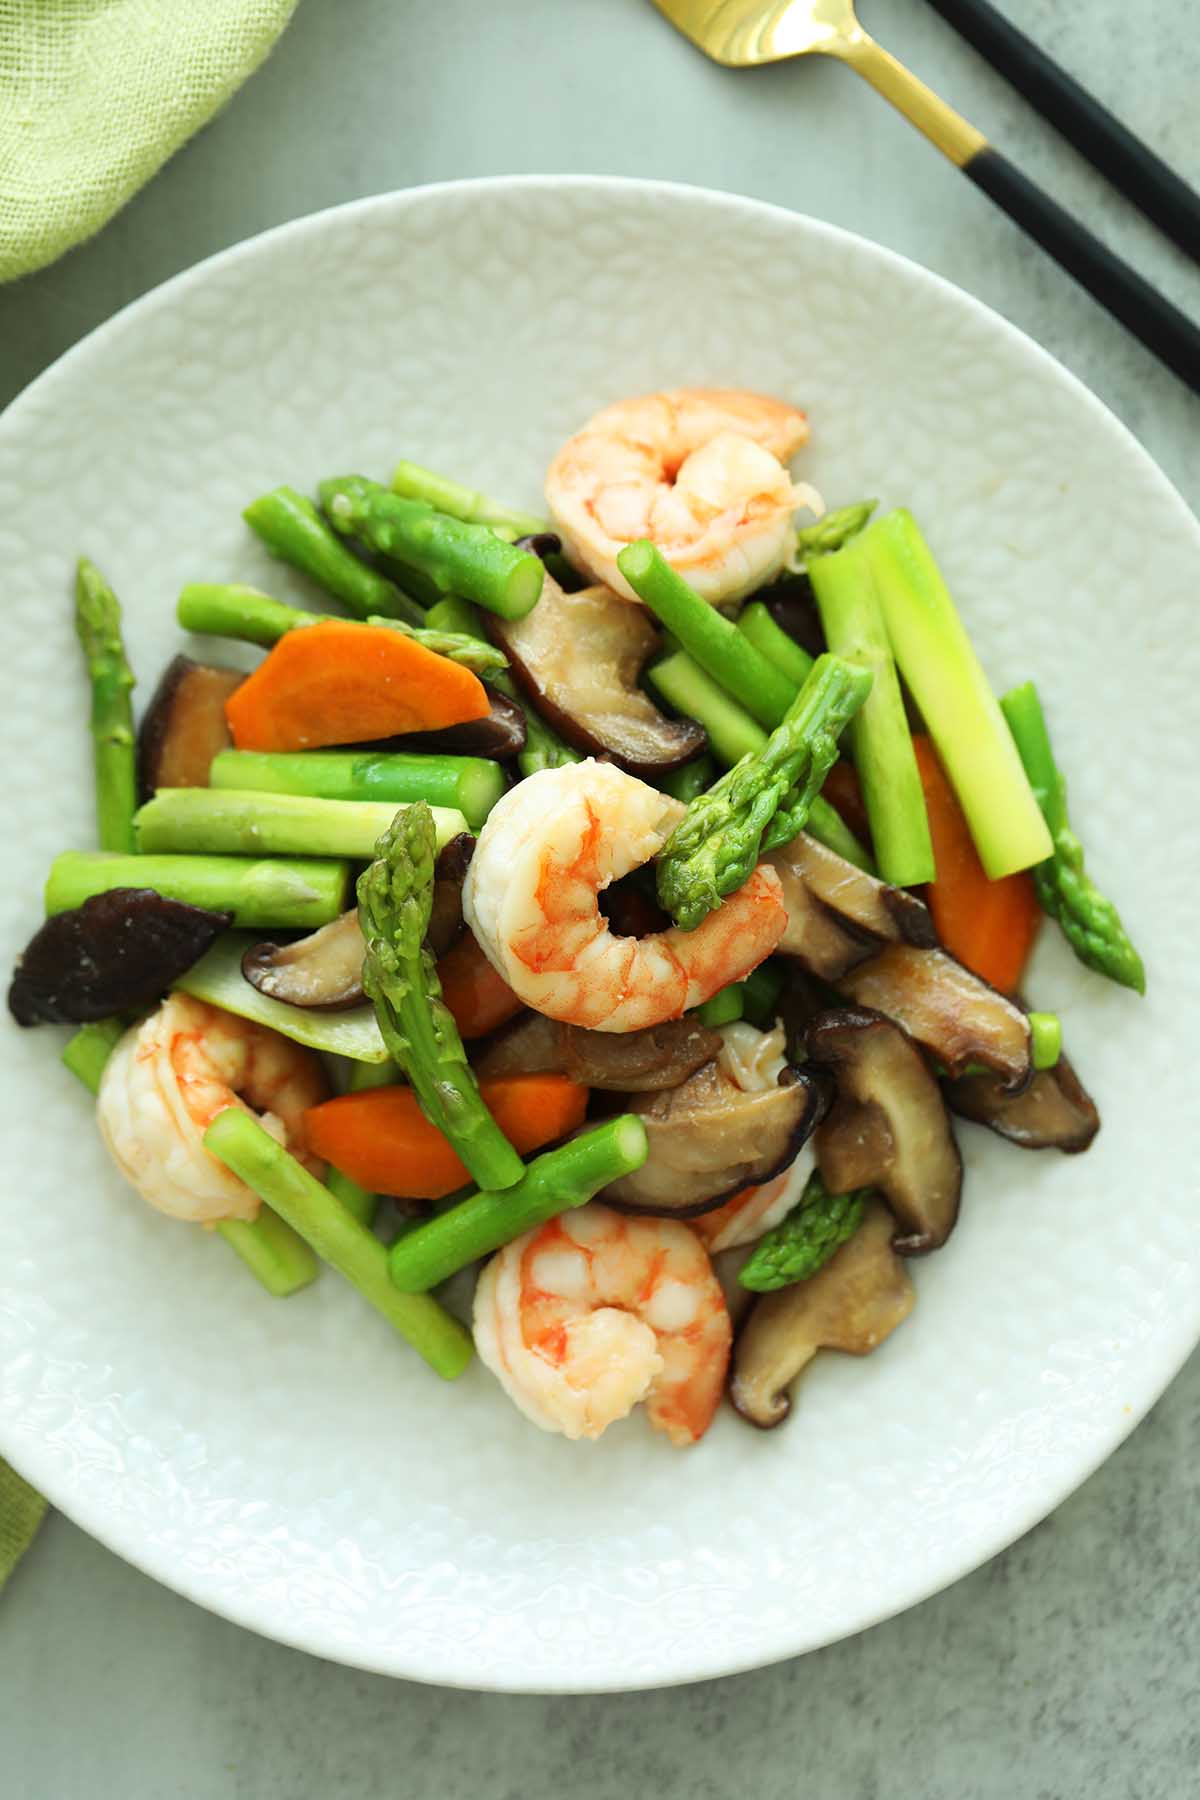 Delicious Stir-fried Asparagus with shrimp served on a plate.